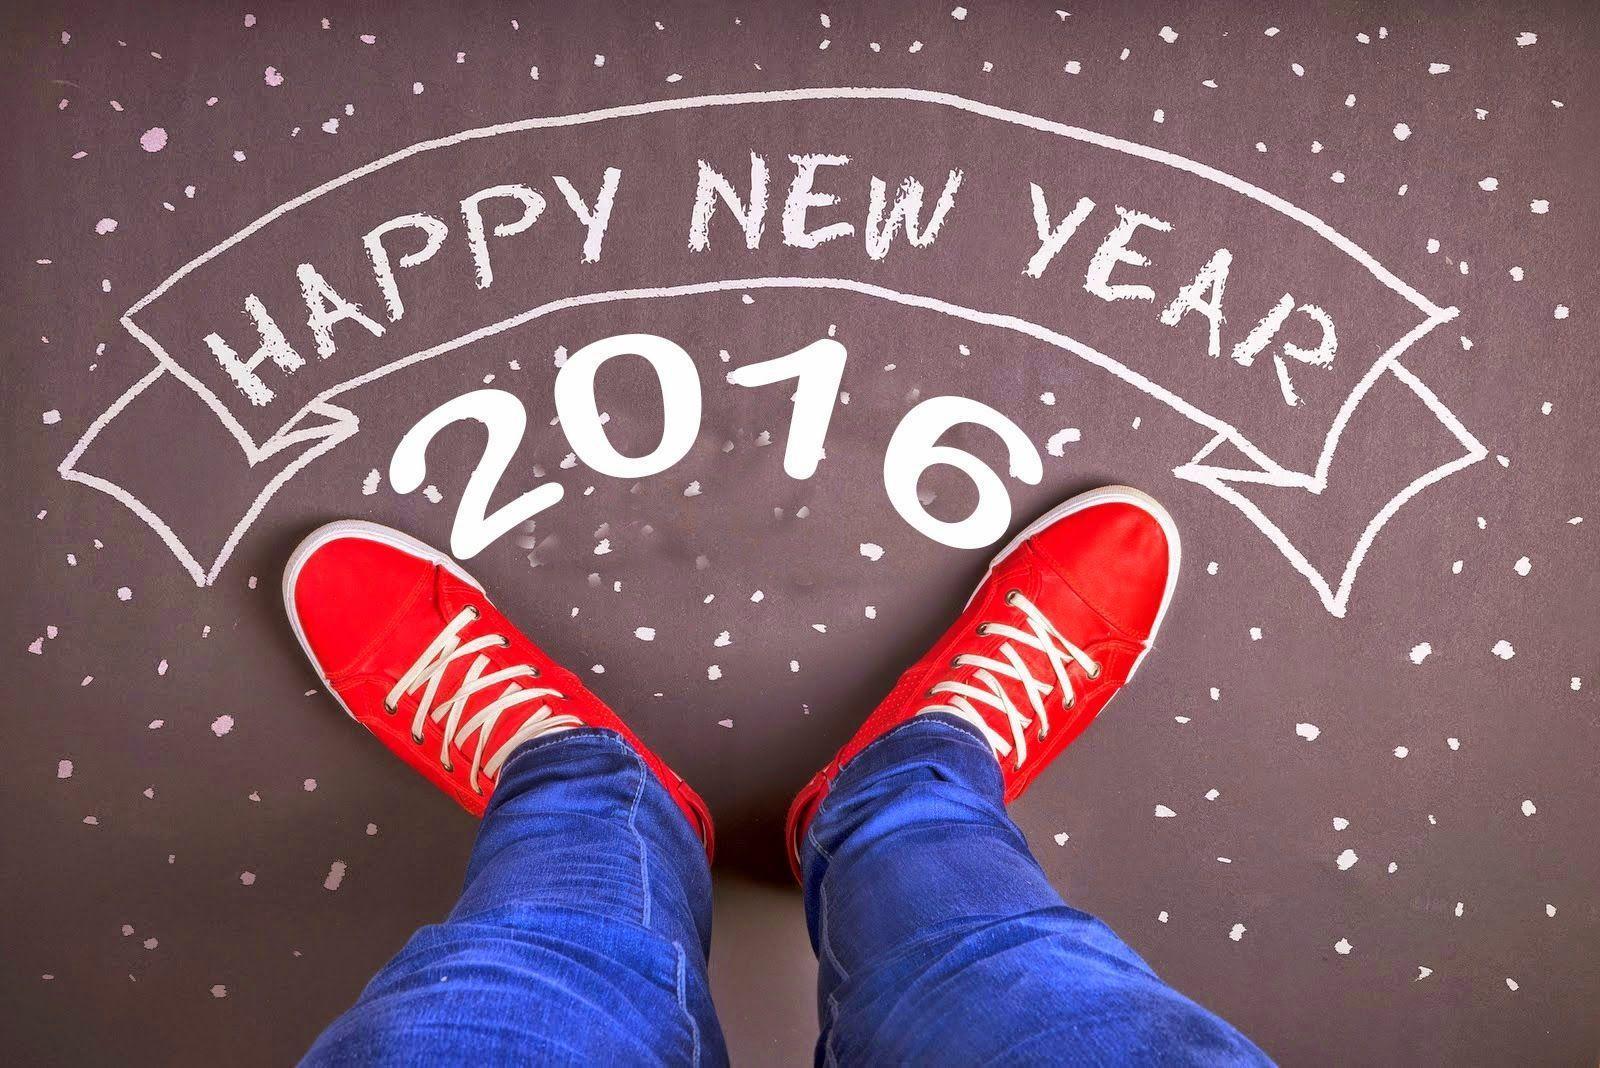 Happy New Year 2016 Wallpaper 3D Wallpaper Background